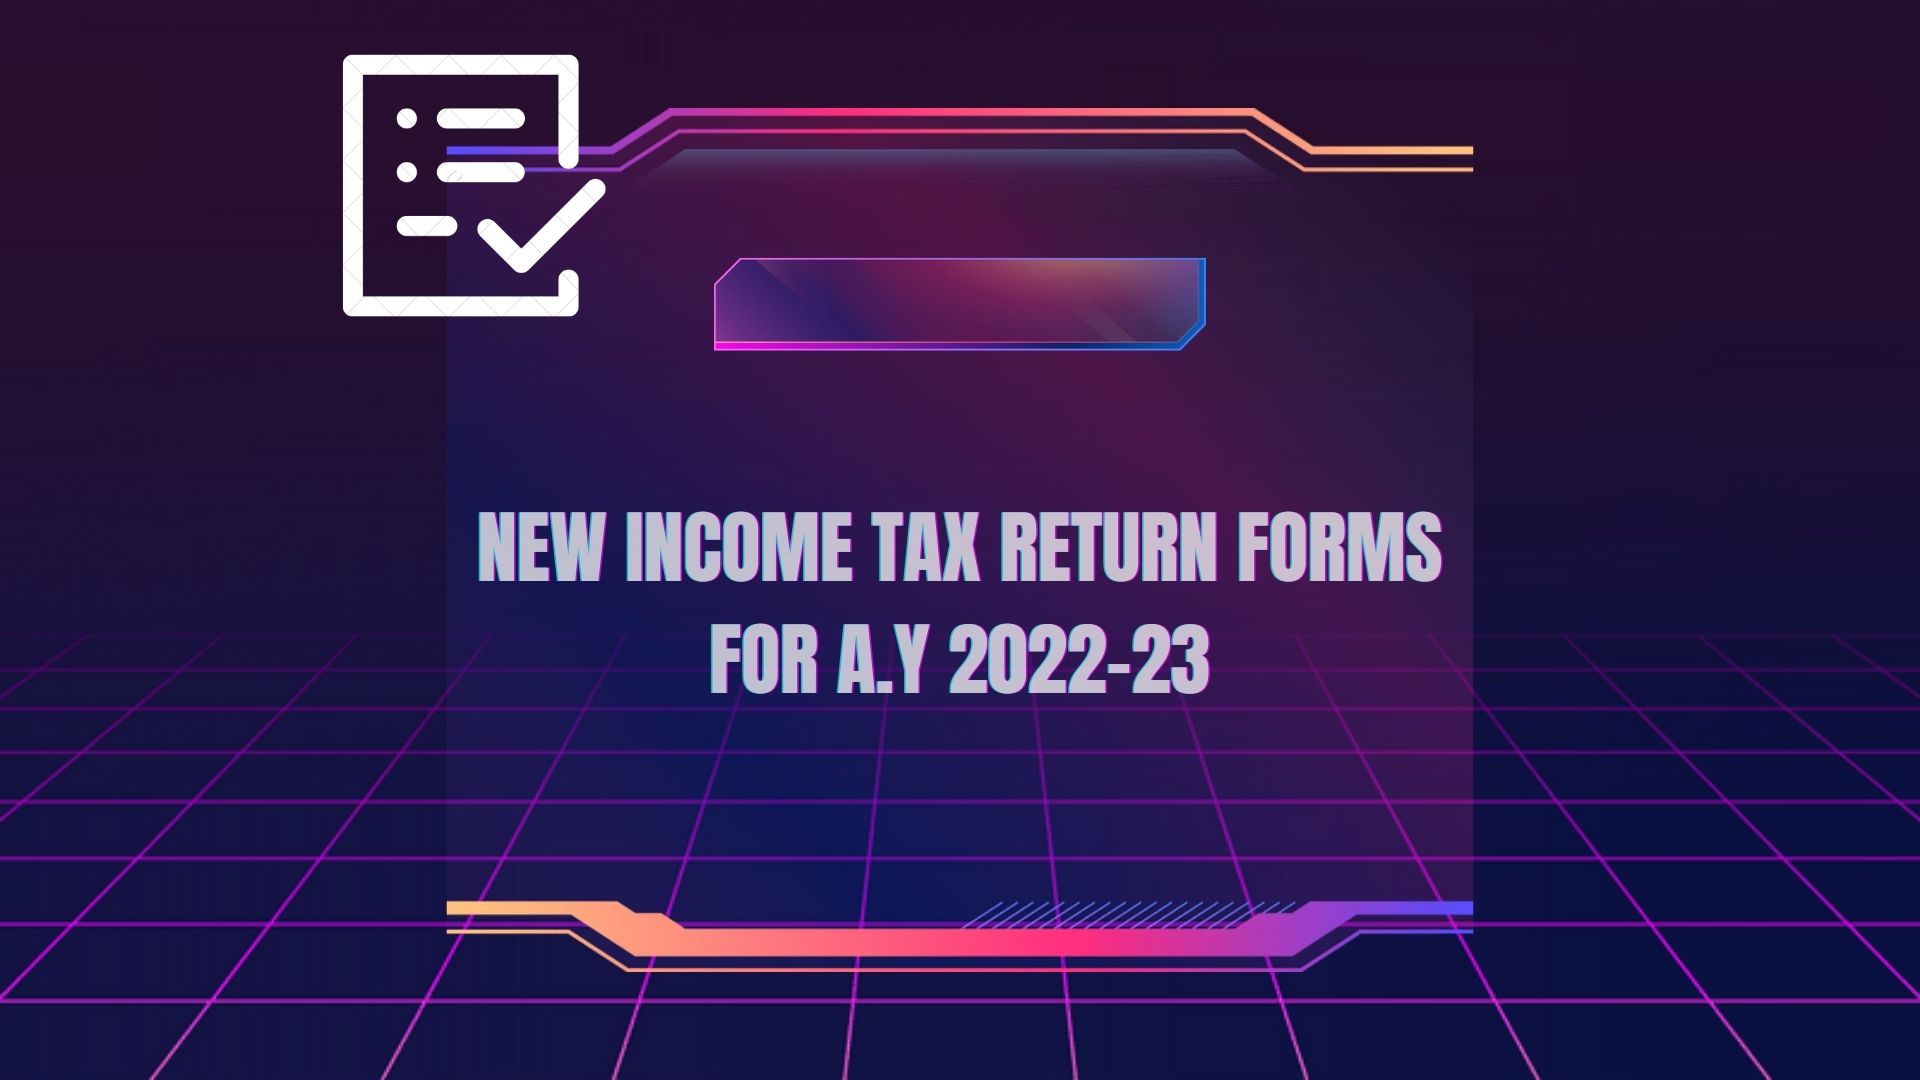 New ITR forms for the A.Y 2022-23